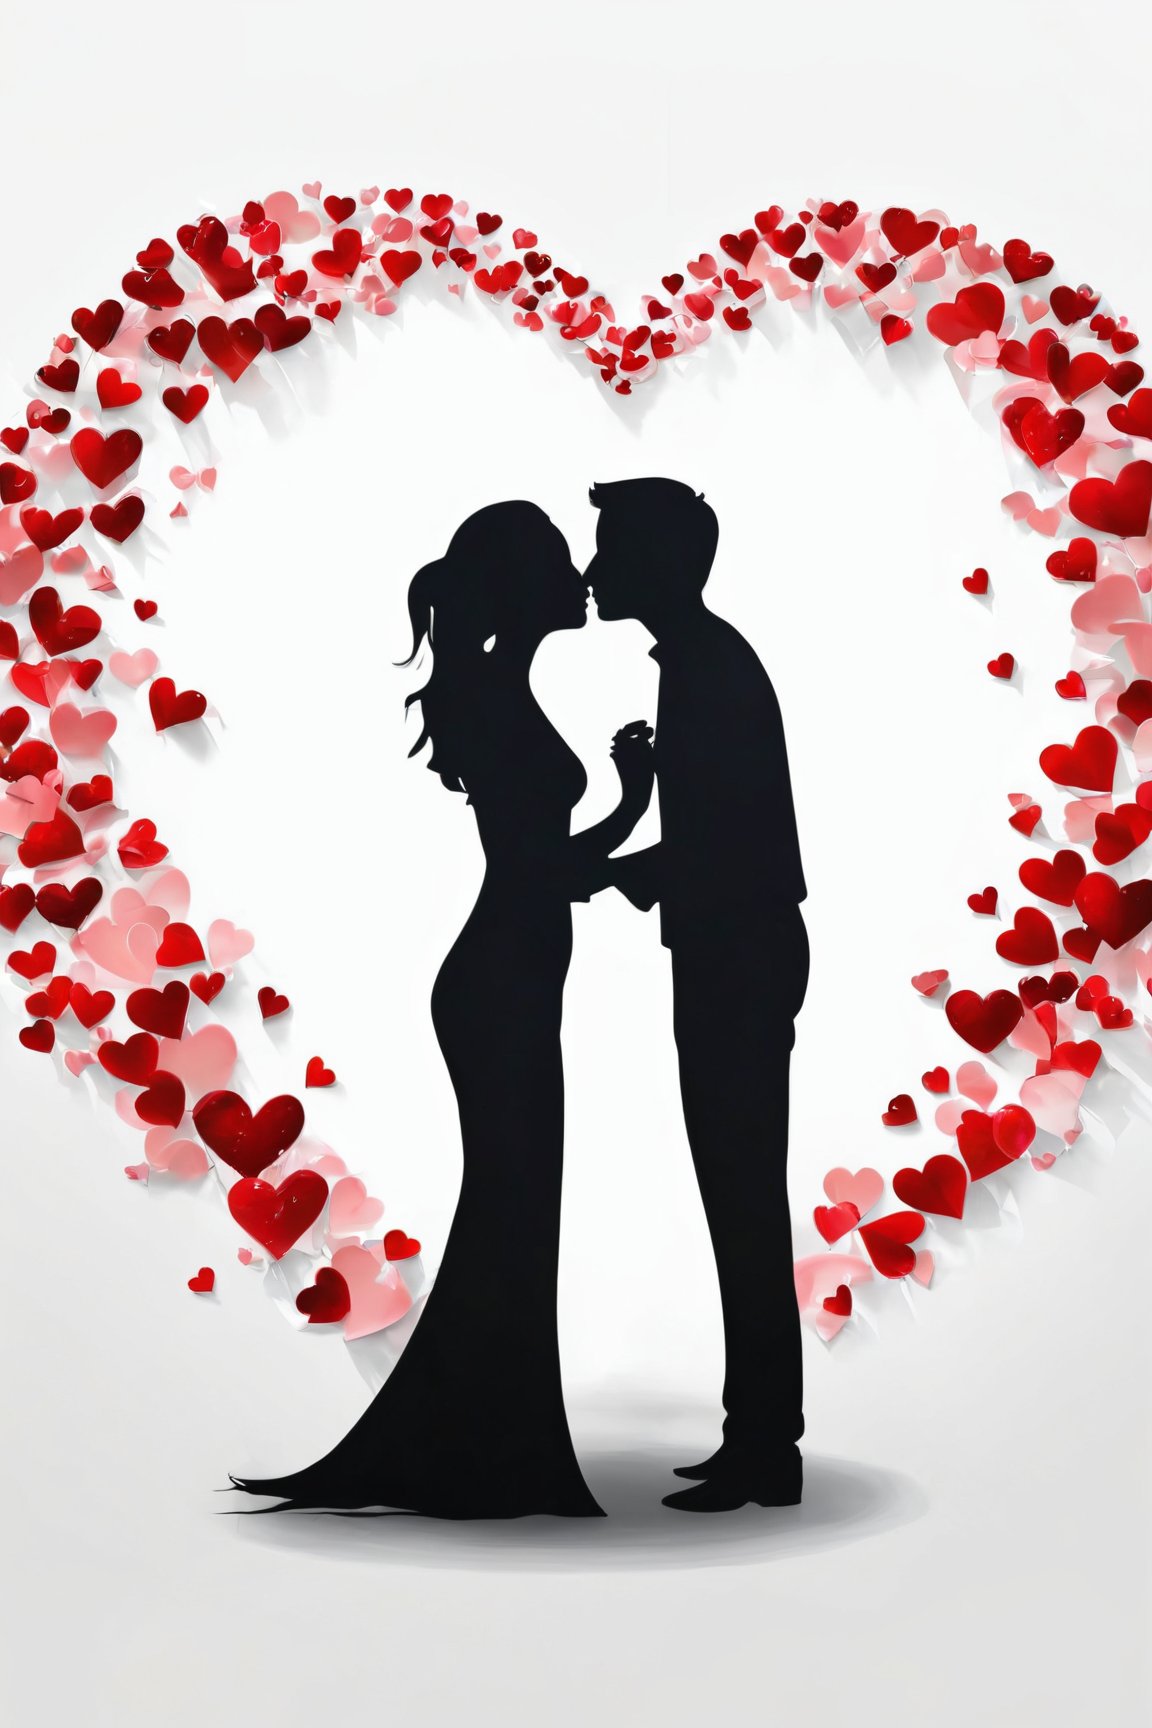 (best quality, 8K, highres, masterpiece), ultra-detailed, AiArtV Valentine's Day theme featuring 1 girl and 1 boy. The composition is set against a stark white background, emphasizing the simplicity and purity of the scene. Central to the image is a heart shape, creatively formed by the shadows of the two figures under, suggesting a moment of intimacy and connection. The figures themselves are presented as silhouettes, capturing the universal language of love through their posture and the imminent kiss, symbolizing a timeless moment of romance. The use of yuri elements adds a layer of depth and diversity, celebrating love in its many forms. This artwork aims to convey the essence of Valentine's Day—love, connection, and the beauty of shared moments